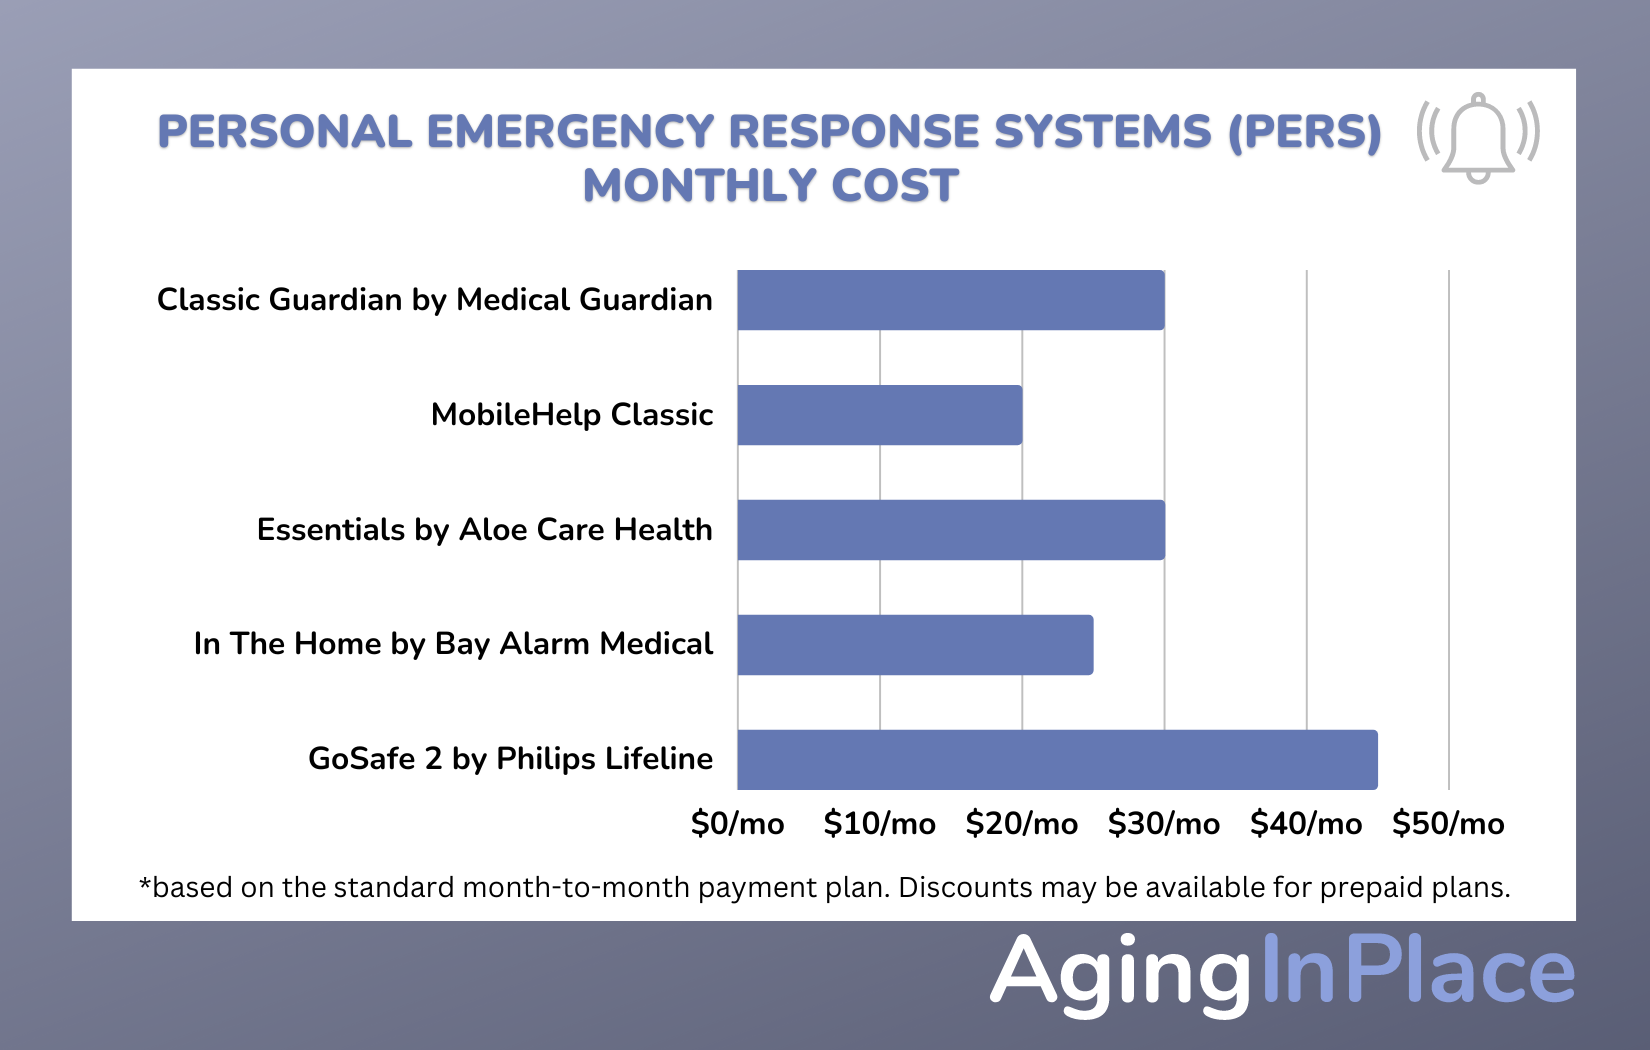 Monthly cost comparison of personal emergency response systems